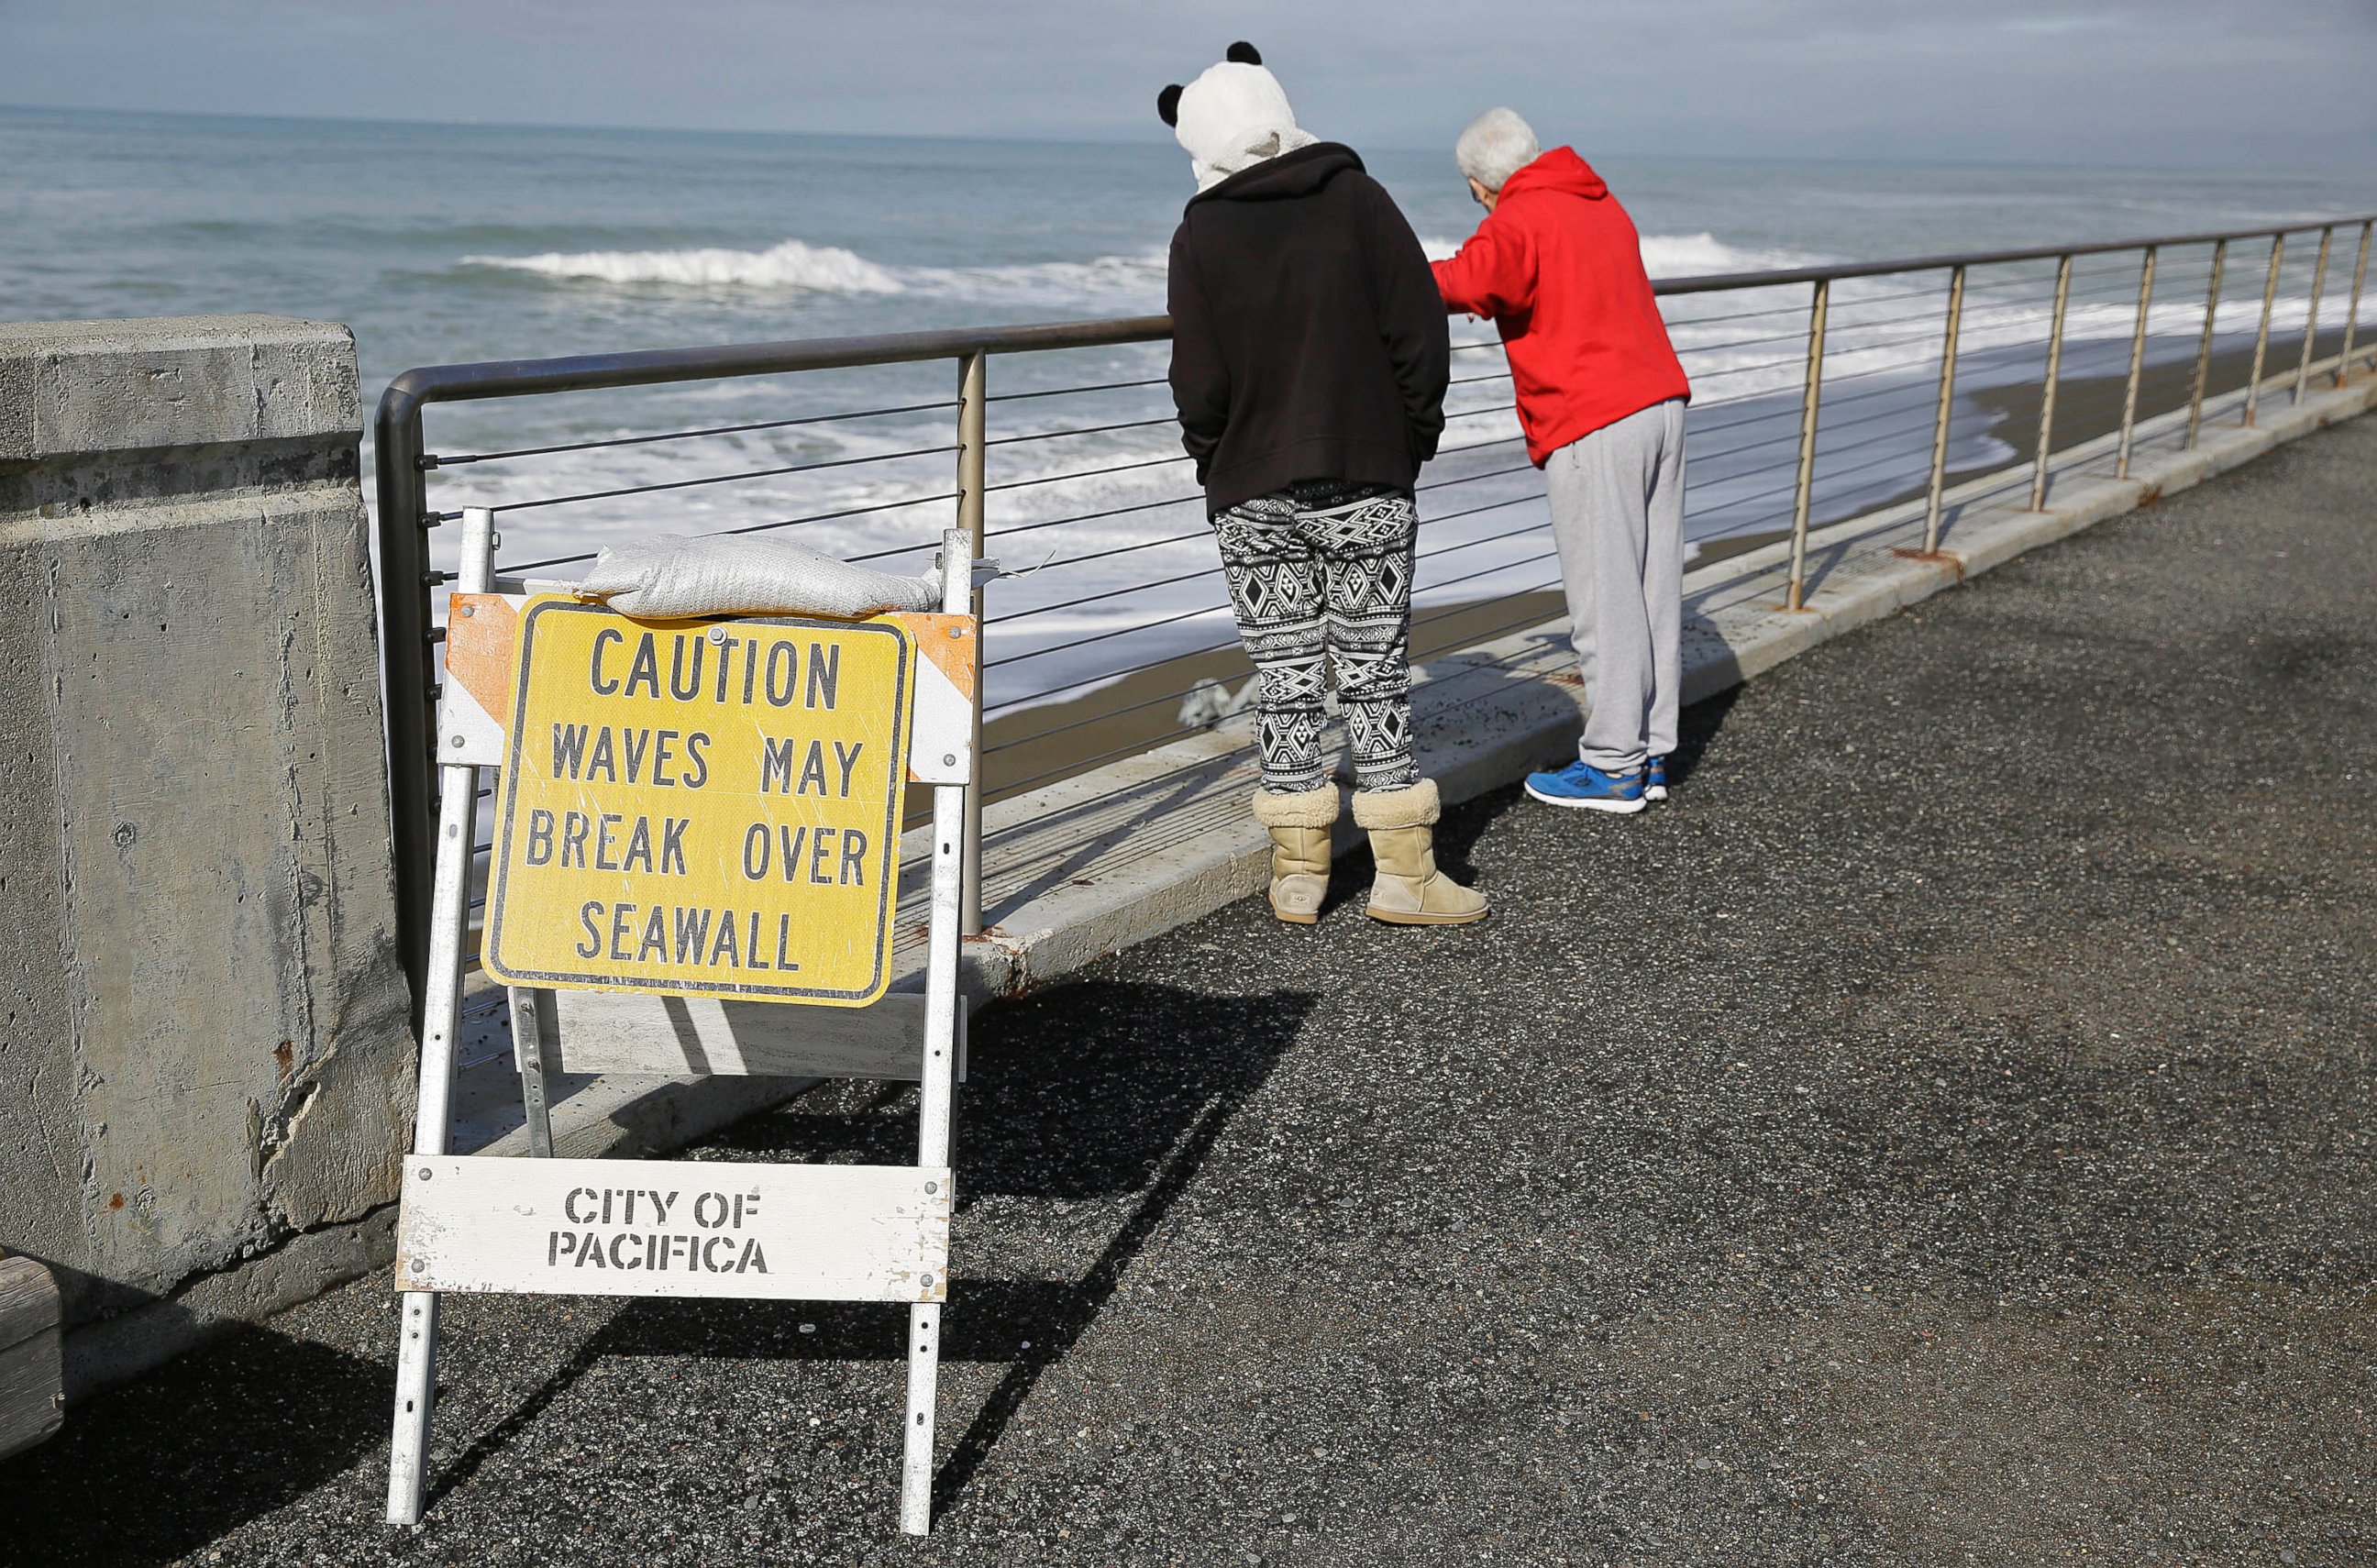 PHOTO: A couple looks at waves breaking near the seawall, Jan. 25, 2016, in Pacifica, Calif.  Strong waves caused by El Nino storms ate away part of the sea wall in the coastal community, threatening homes and an apartment building.